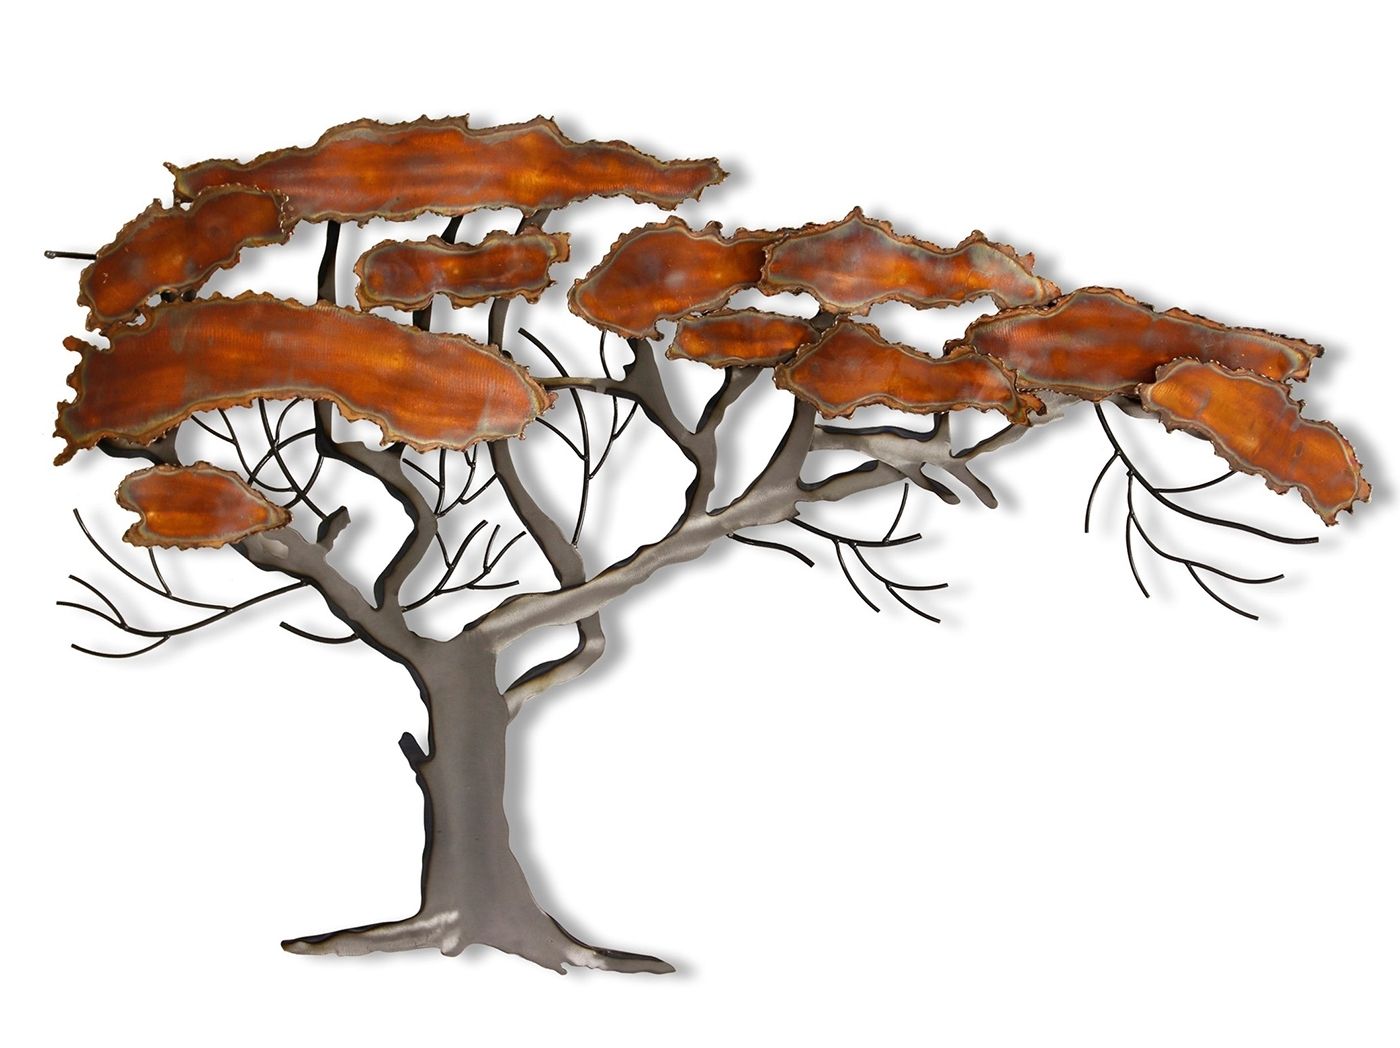 Copper And Metal Tree Wall Art 27"w X 43"h | Steinhafels Inside Most Recent Metal Tree Wall Art (View 8 of 15)